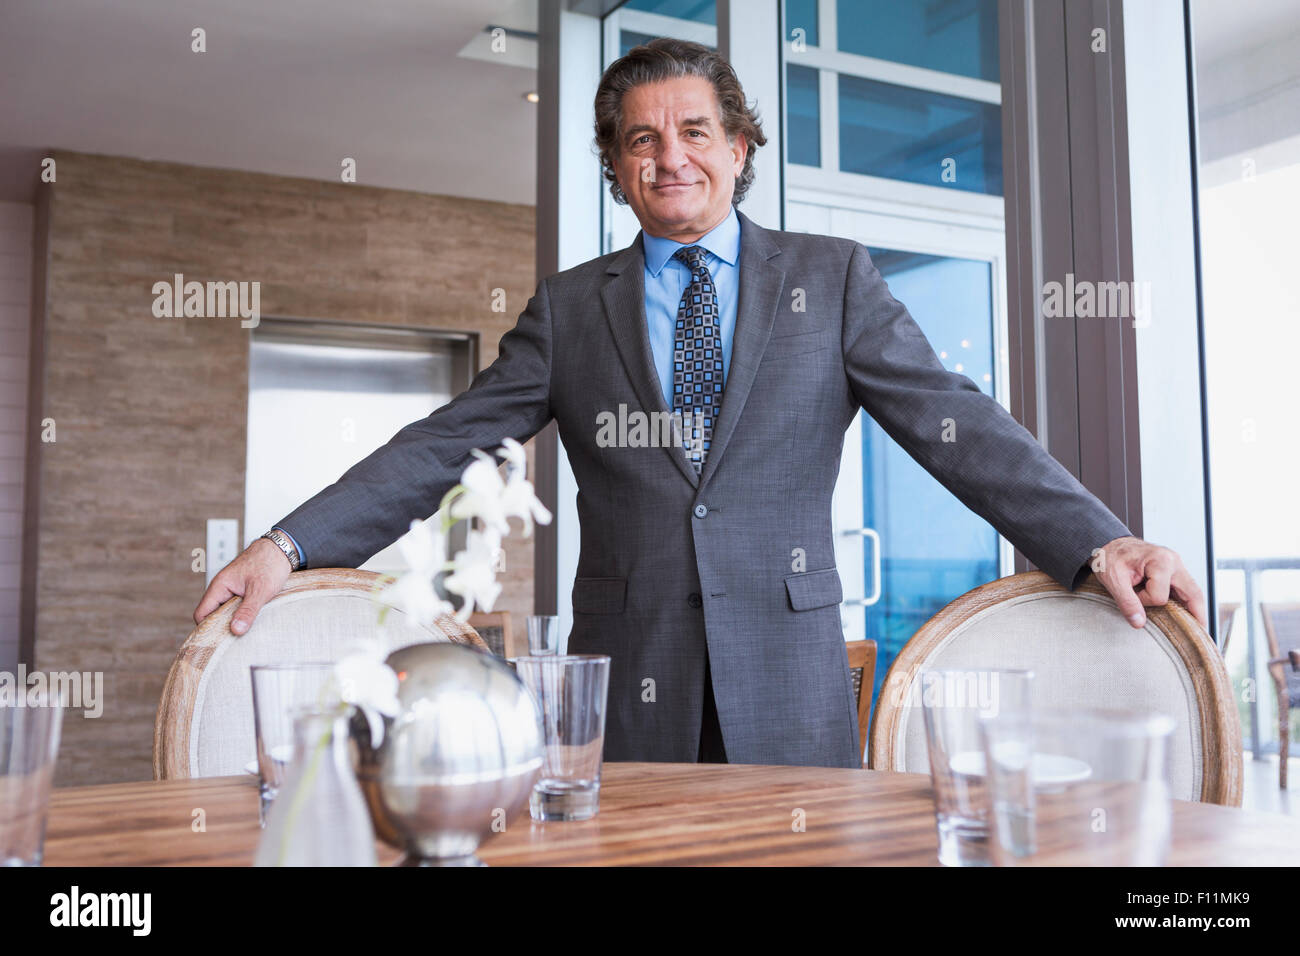 Businessman standing at dining table Stock Photo